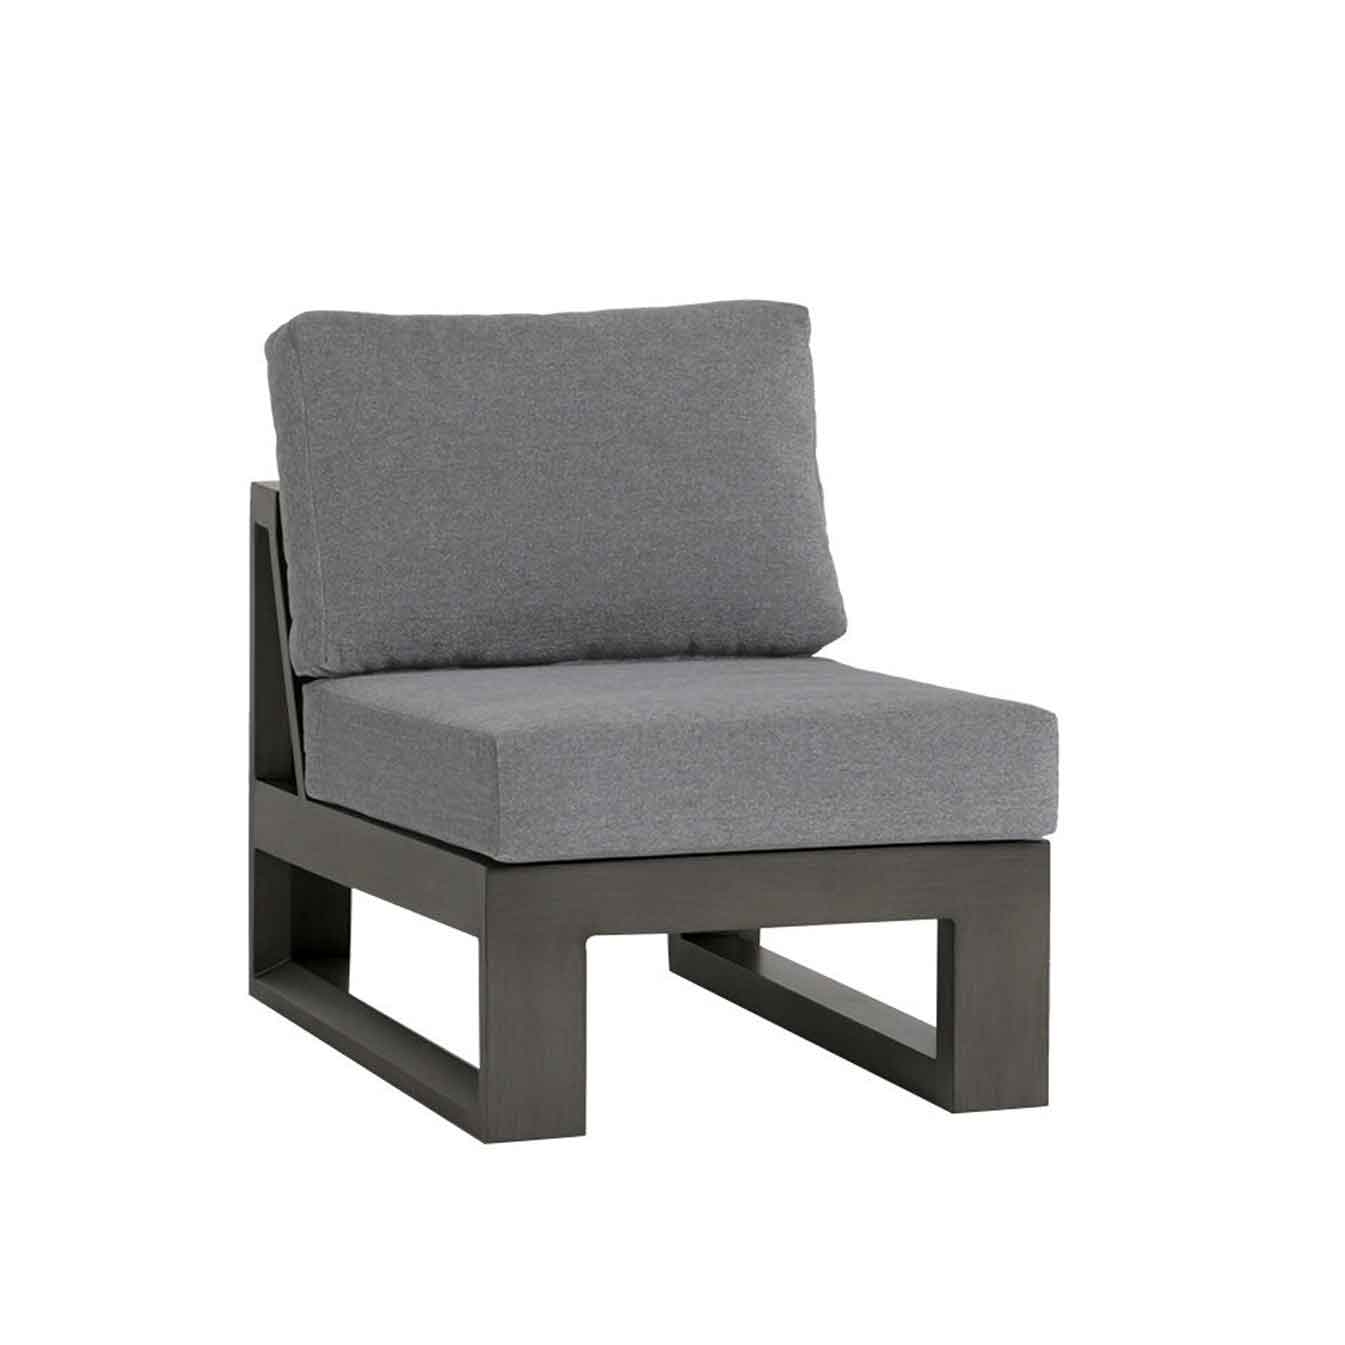 Elements 5.0 Armless Chair Sectional - Ash Grey